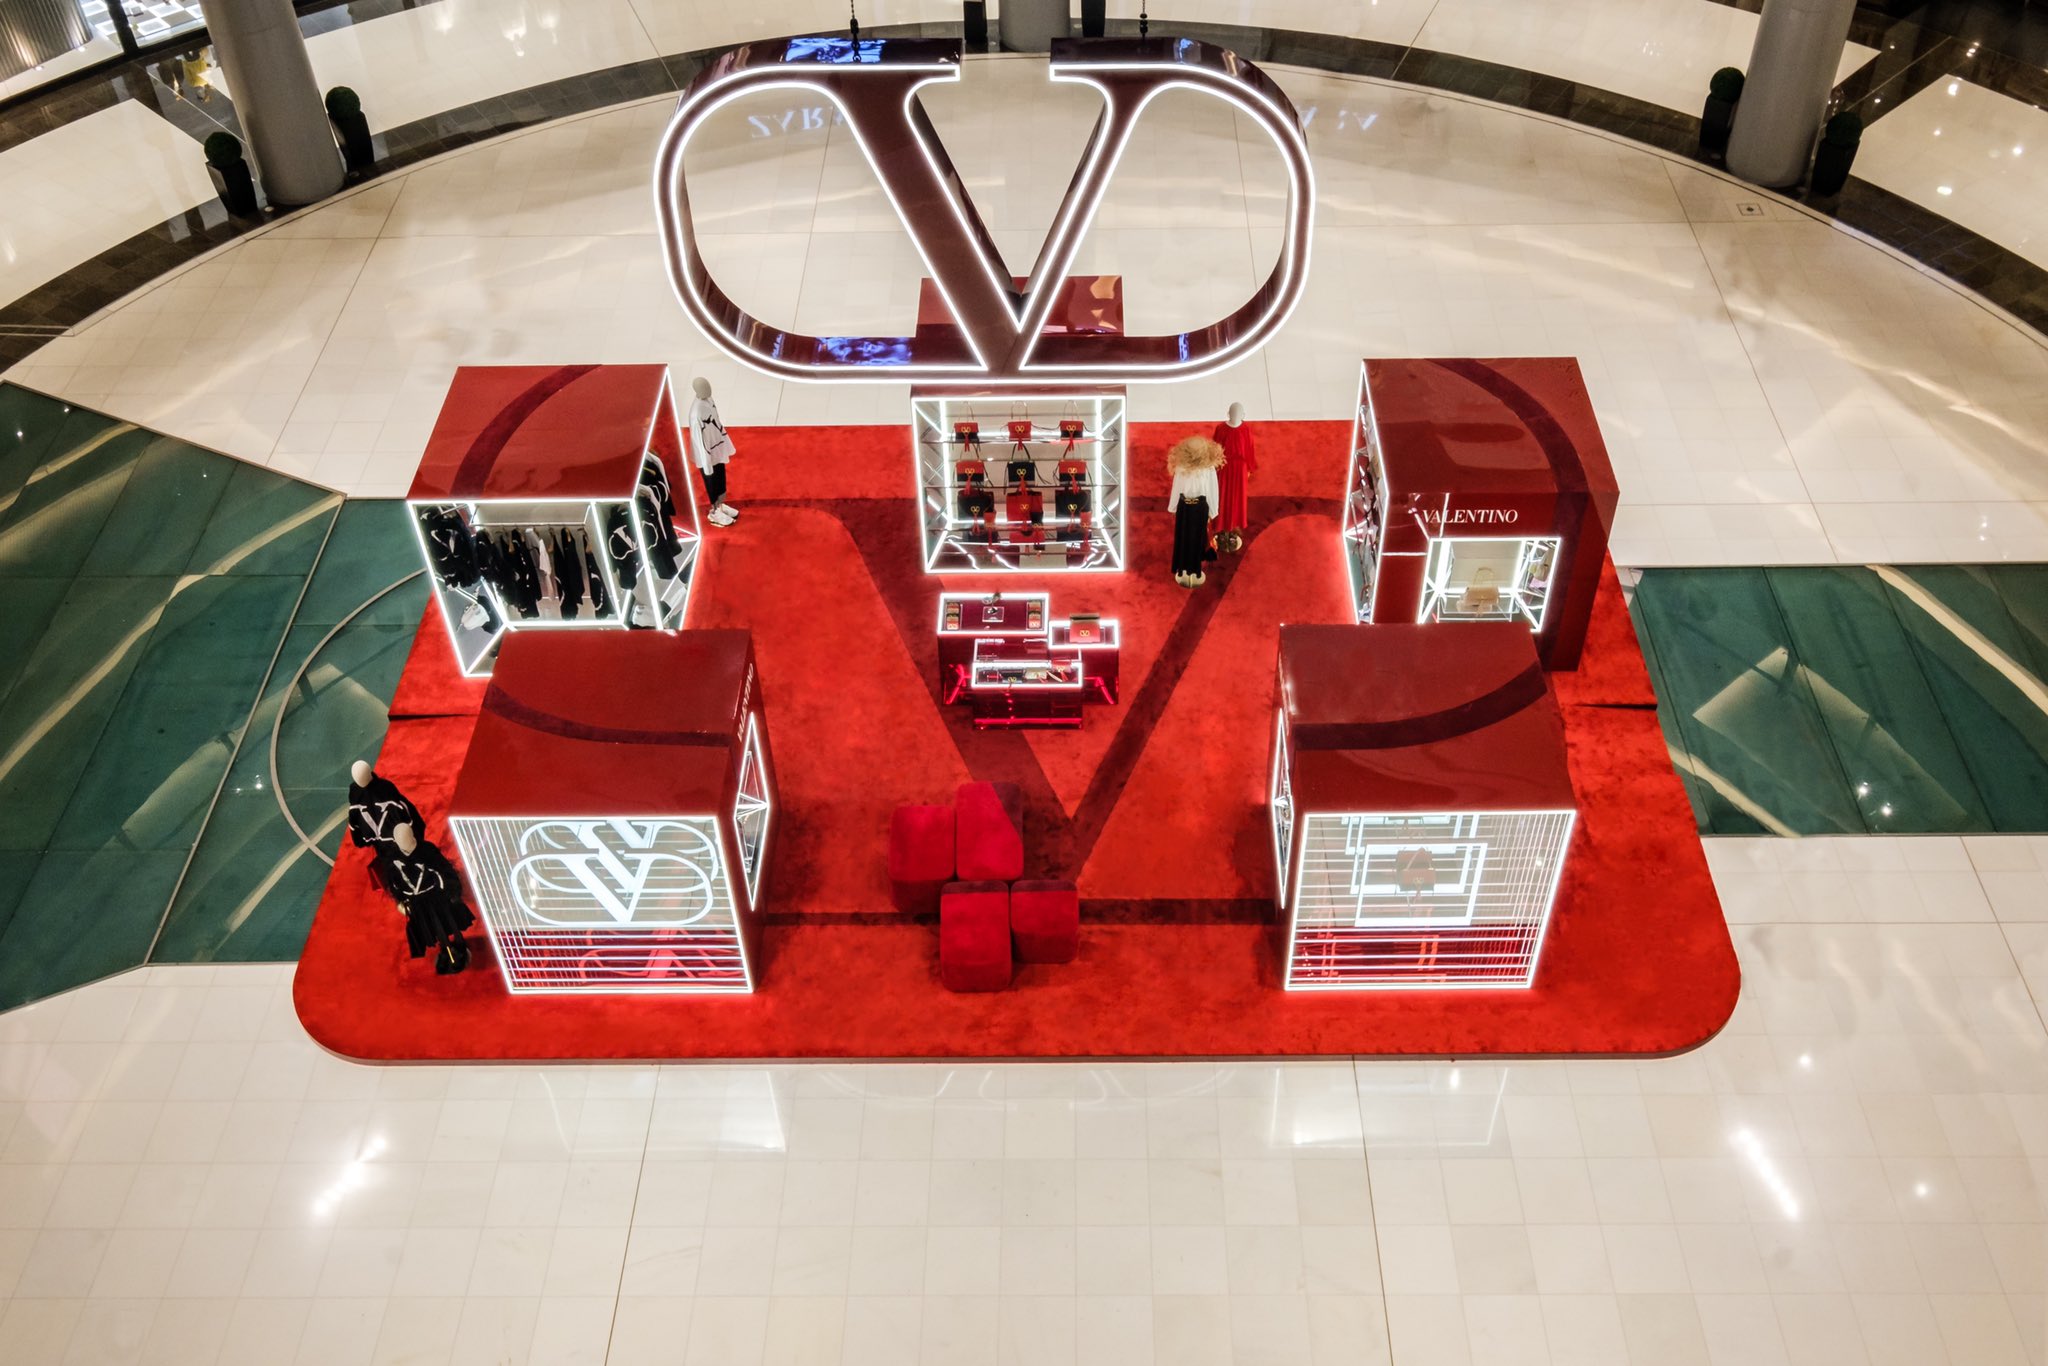 Valentino on "#VRING Dubai. Experience the pop up at The Mall now until April 1st https://t.co/TqVHpmmvWf" / X